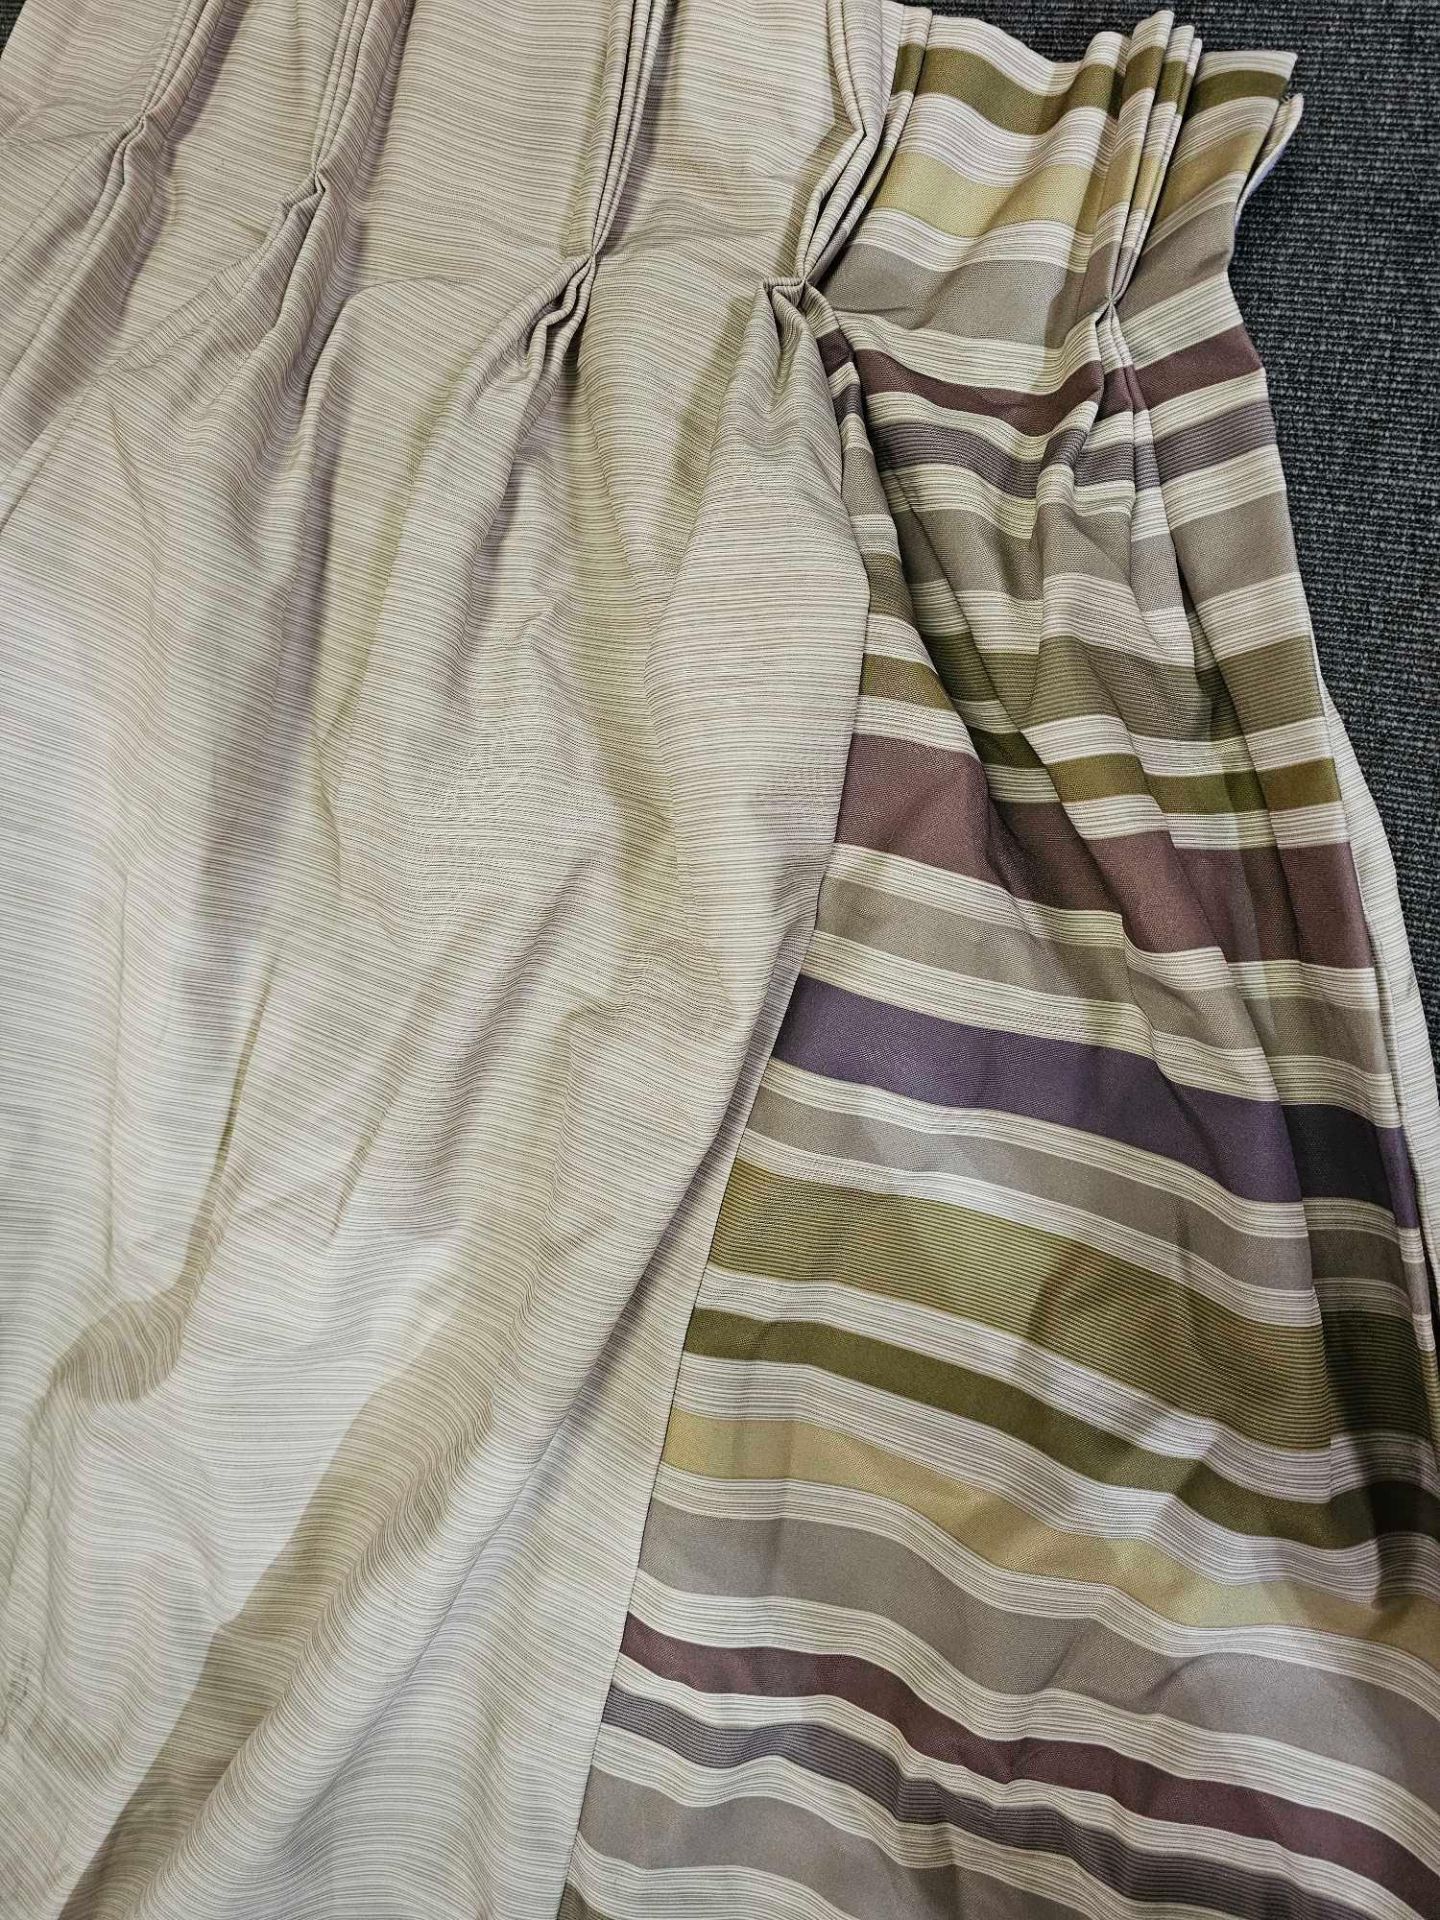 A Pair Of Curtains Striped Edge Purple/Green/Beige/Lime/Brown Size 284 x 250cm ( Ref Red 163) - Image 2 of 2